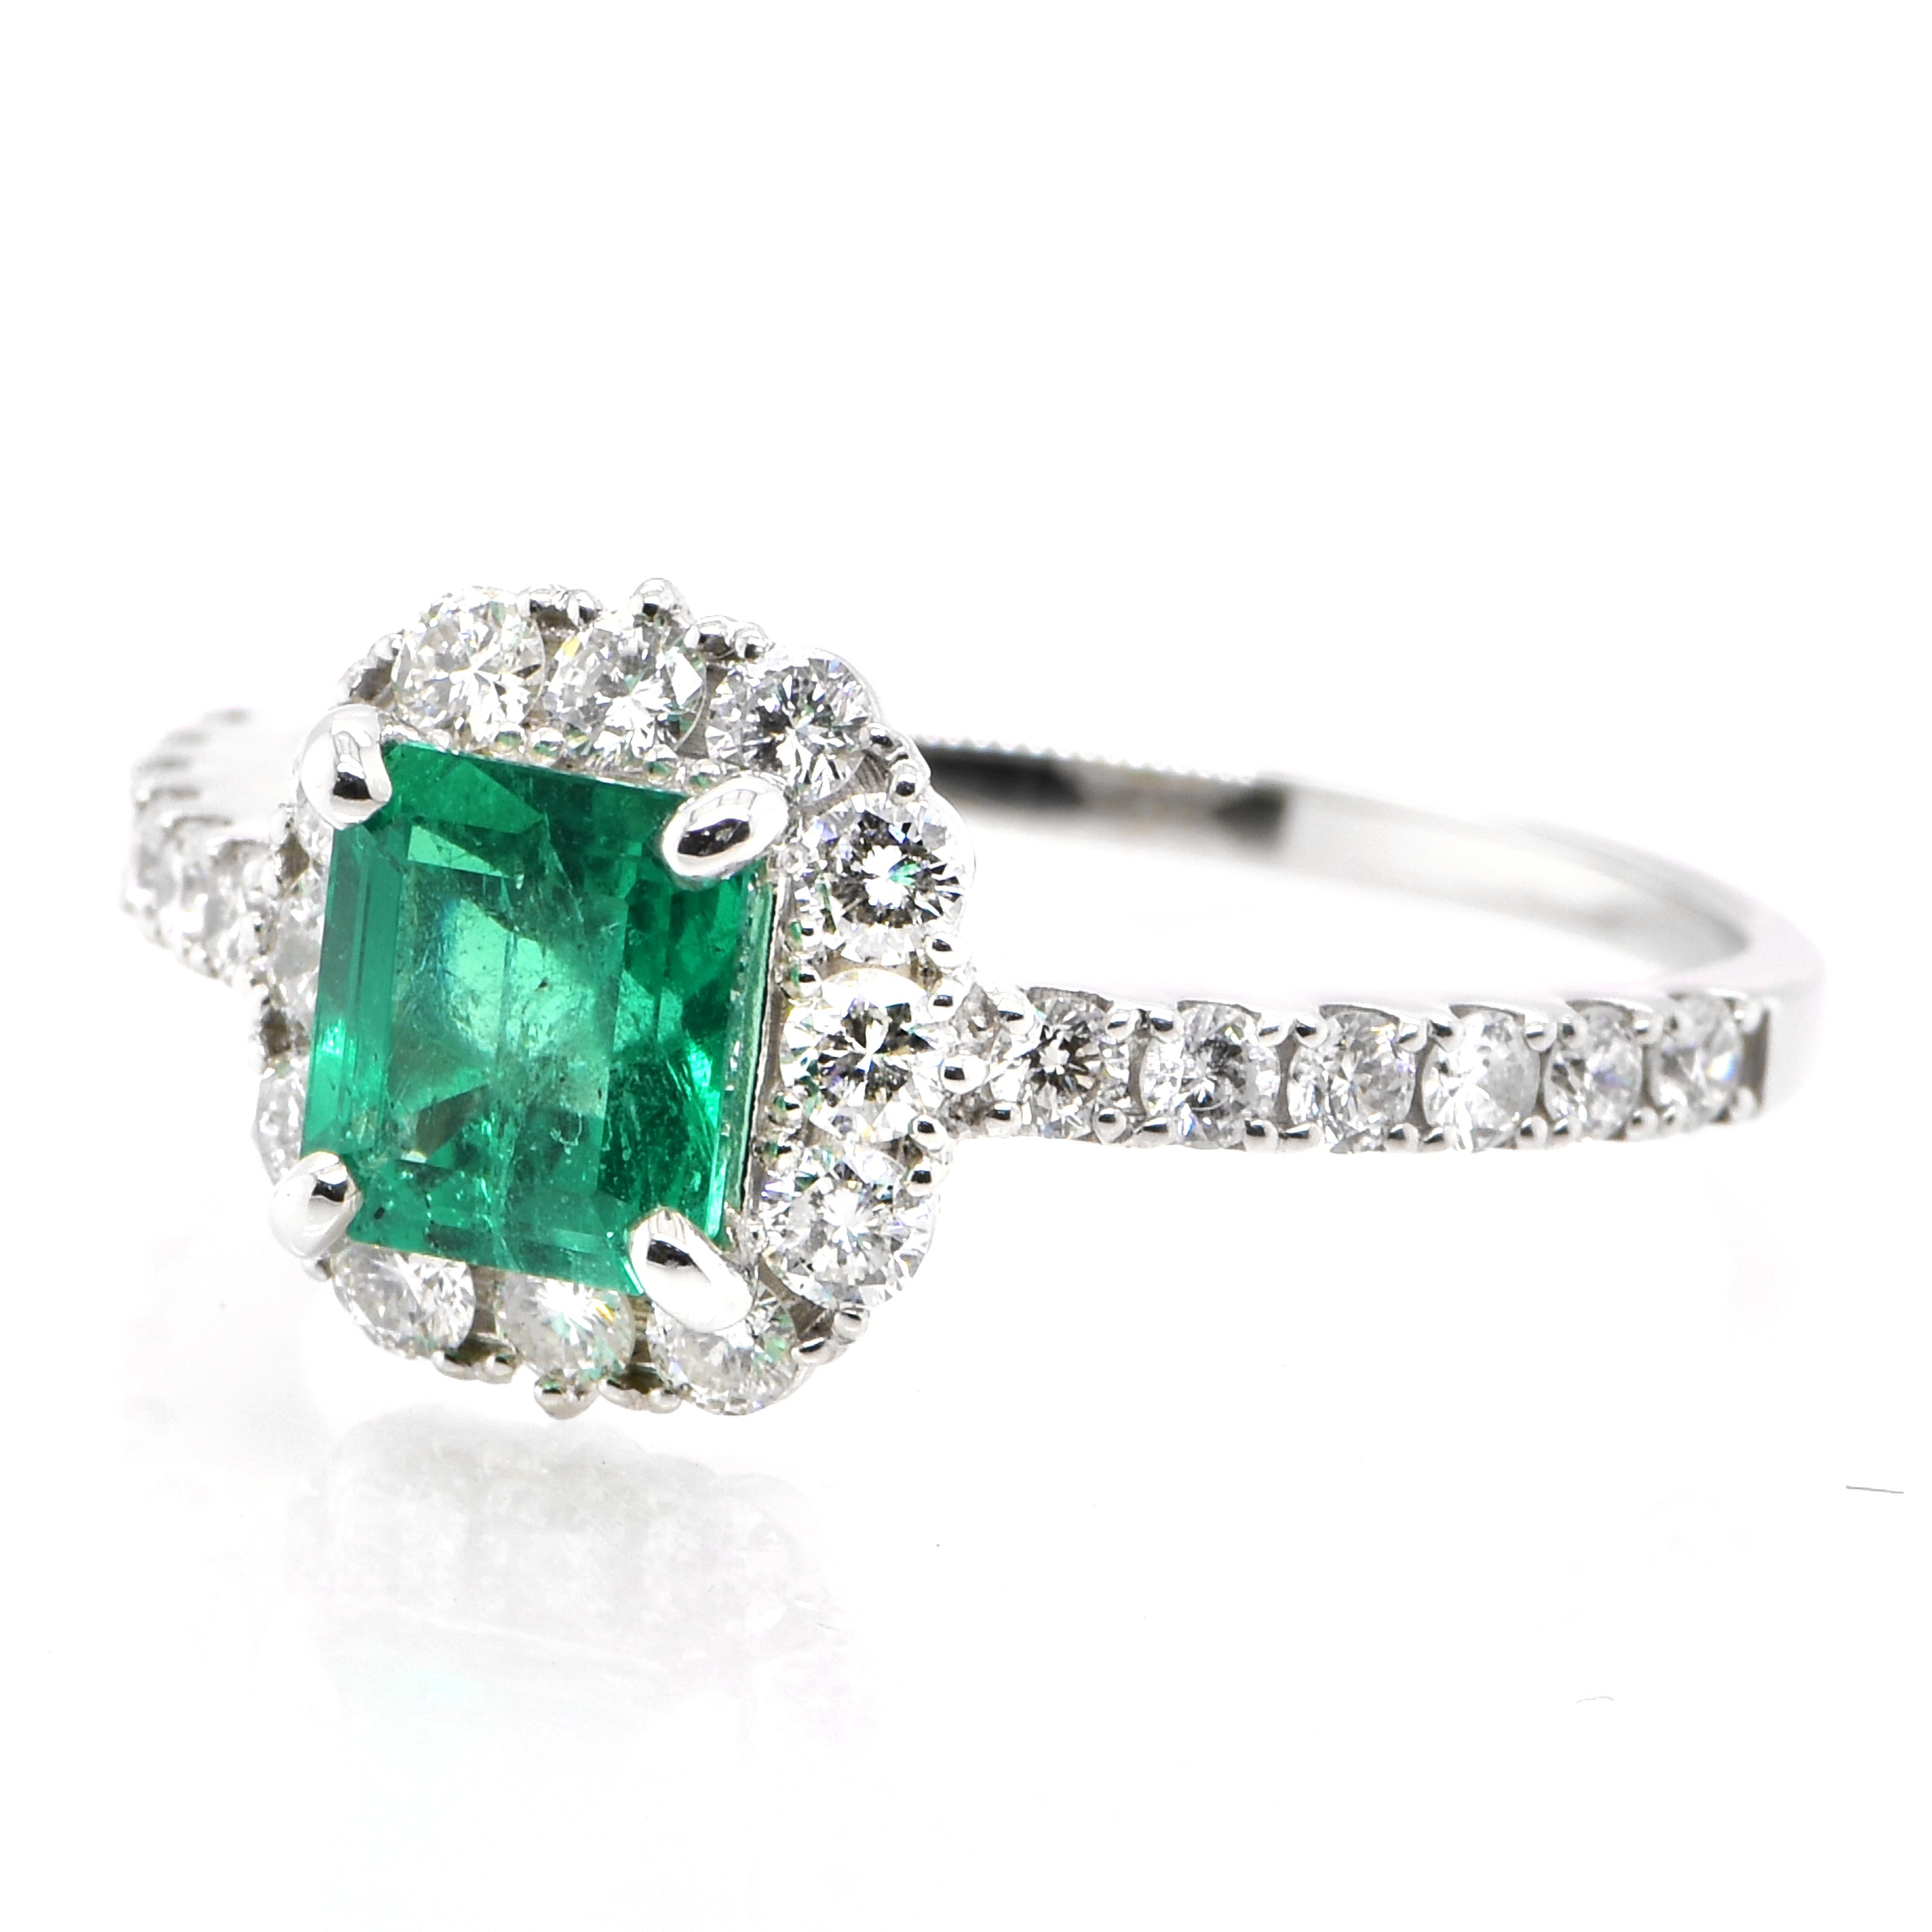 A stunning ring featuring a 1.05 Carat Natural Emerald and 0.67 Carats of Diamond Accents set in Platinum. People have admired emerald’s green for thousands of years. Emeralds have always been associated with the lushest landscapes and the richest